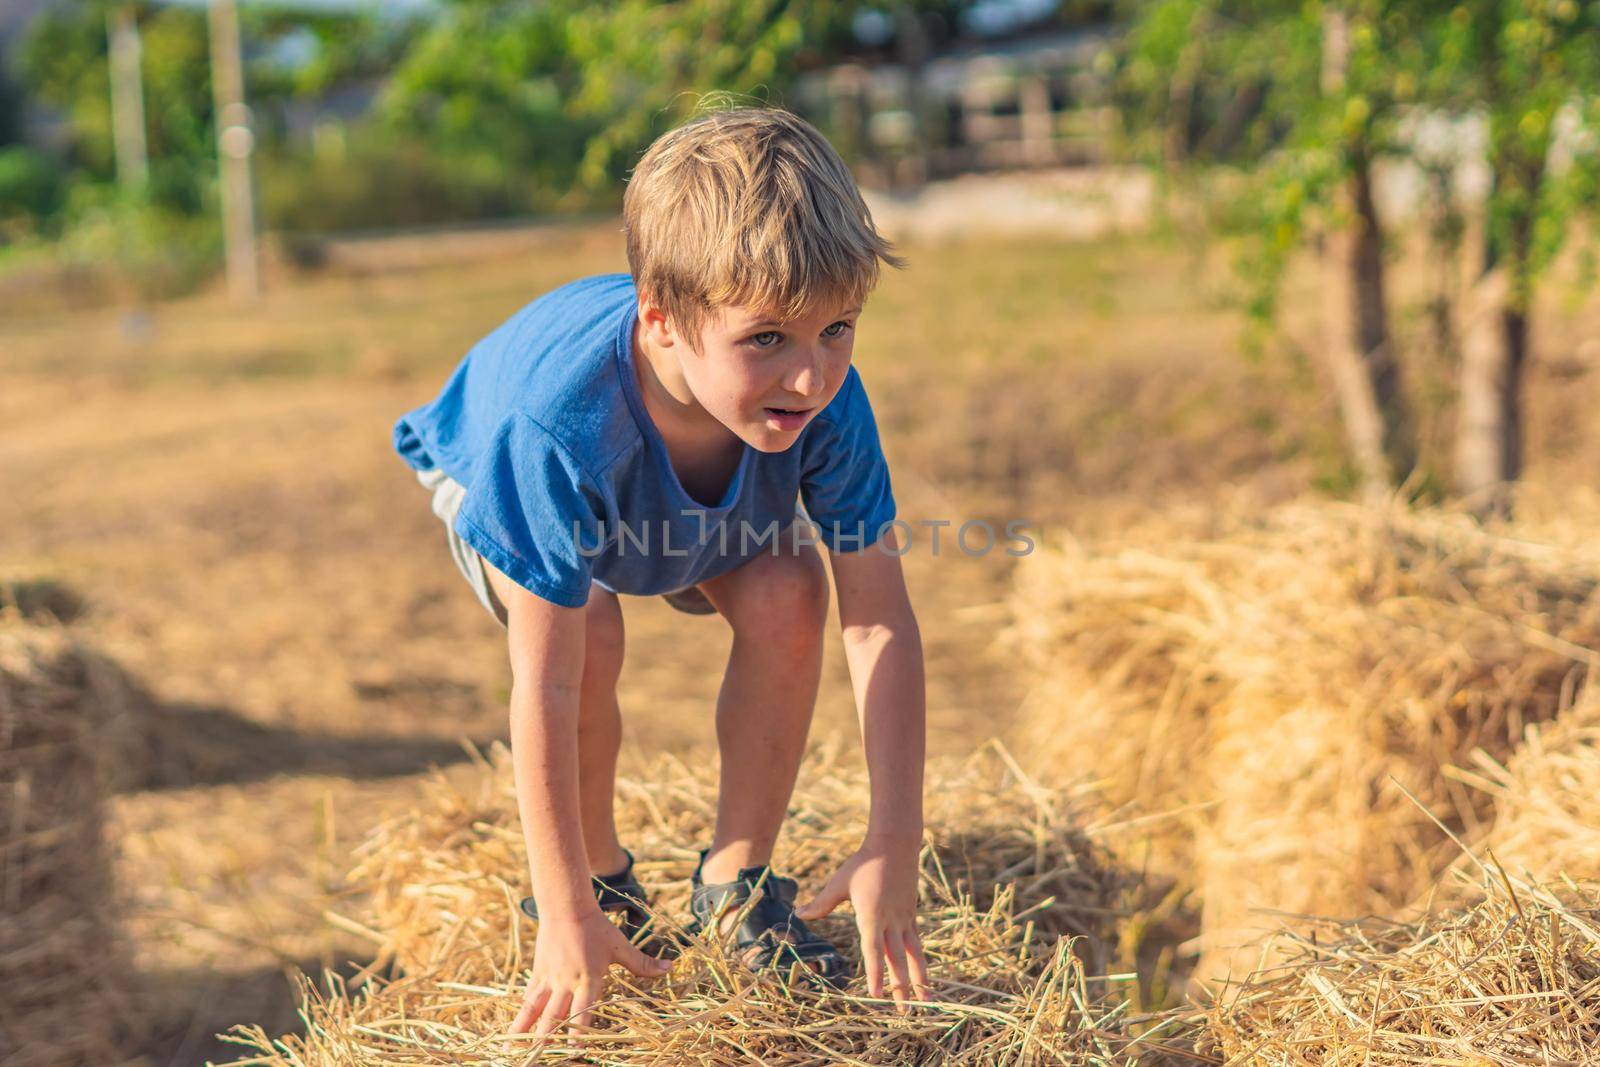 Boy blue t-shirt smile play climbs on down haystack bales of dry hay, clear sky sunny day. Outdoor kid children summer leisure activities. Concept happy childhood countryside, air close to nature.